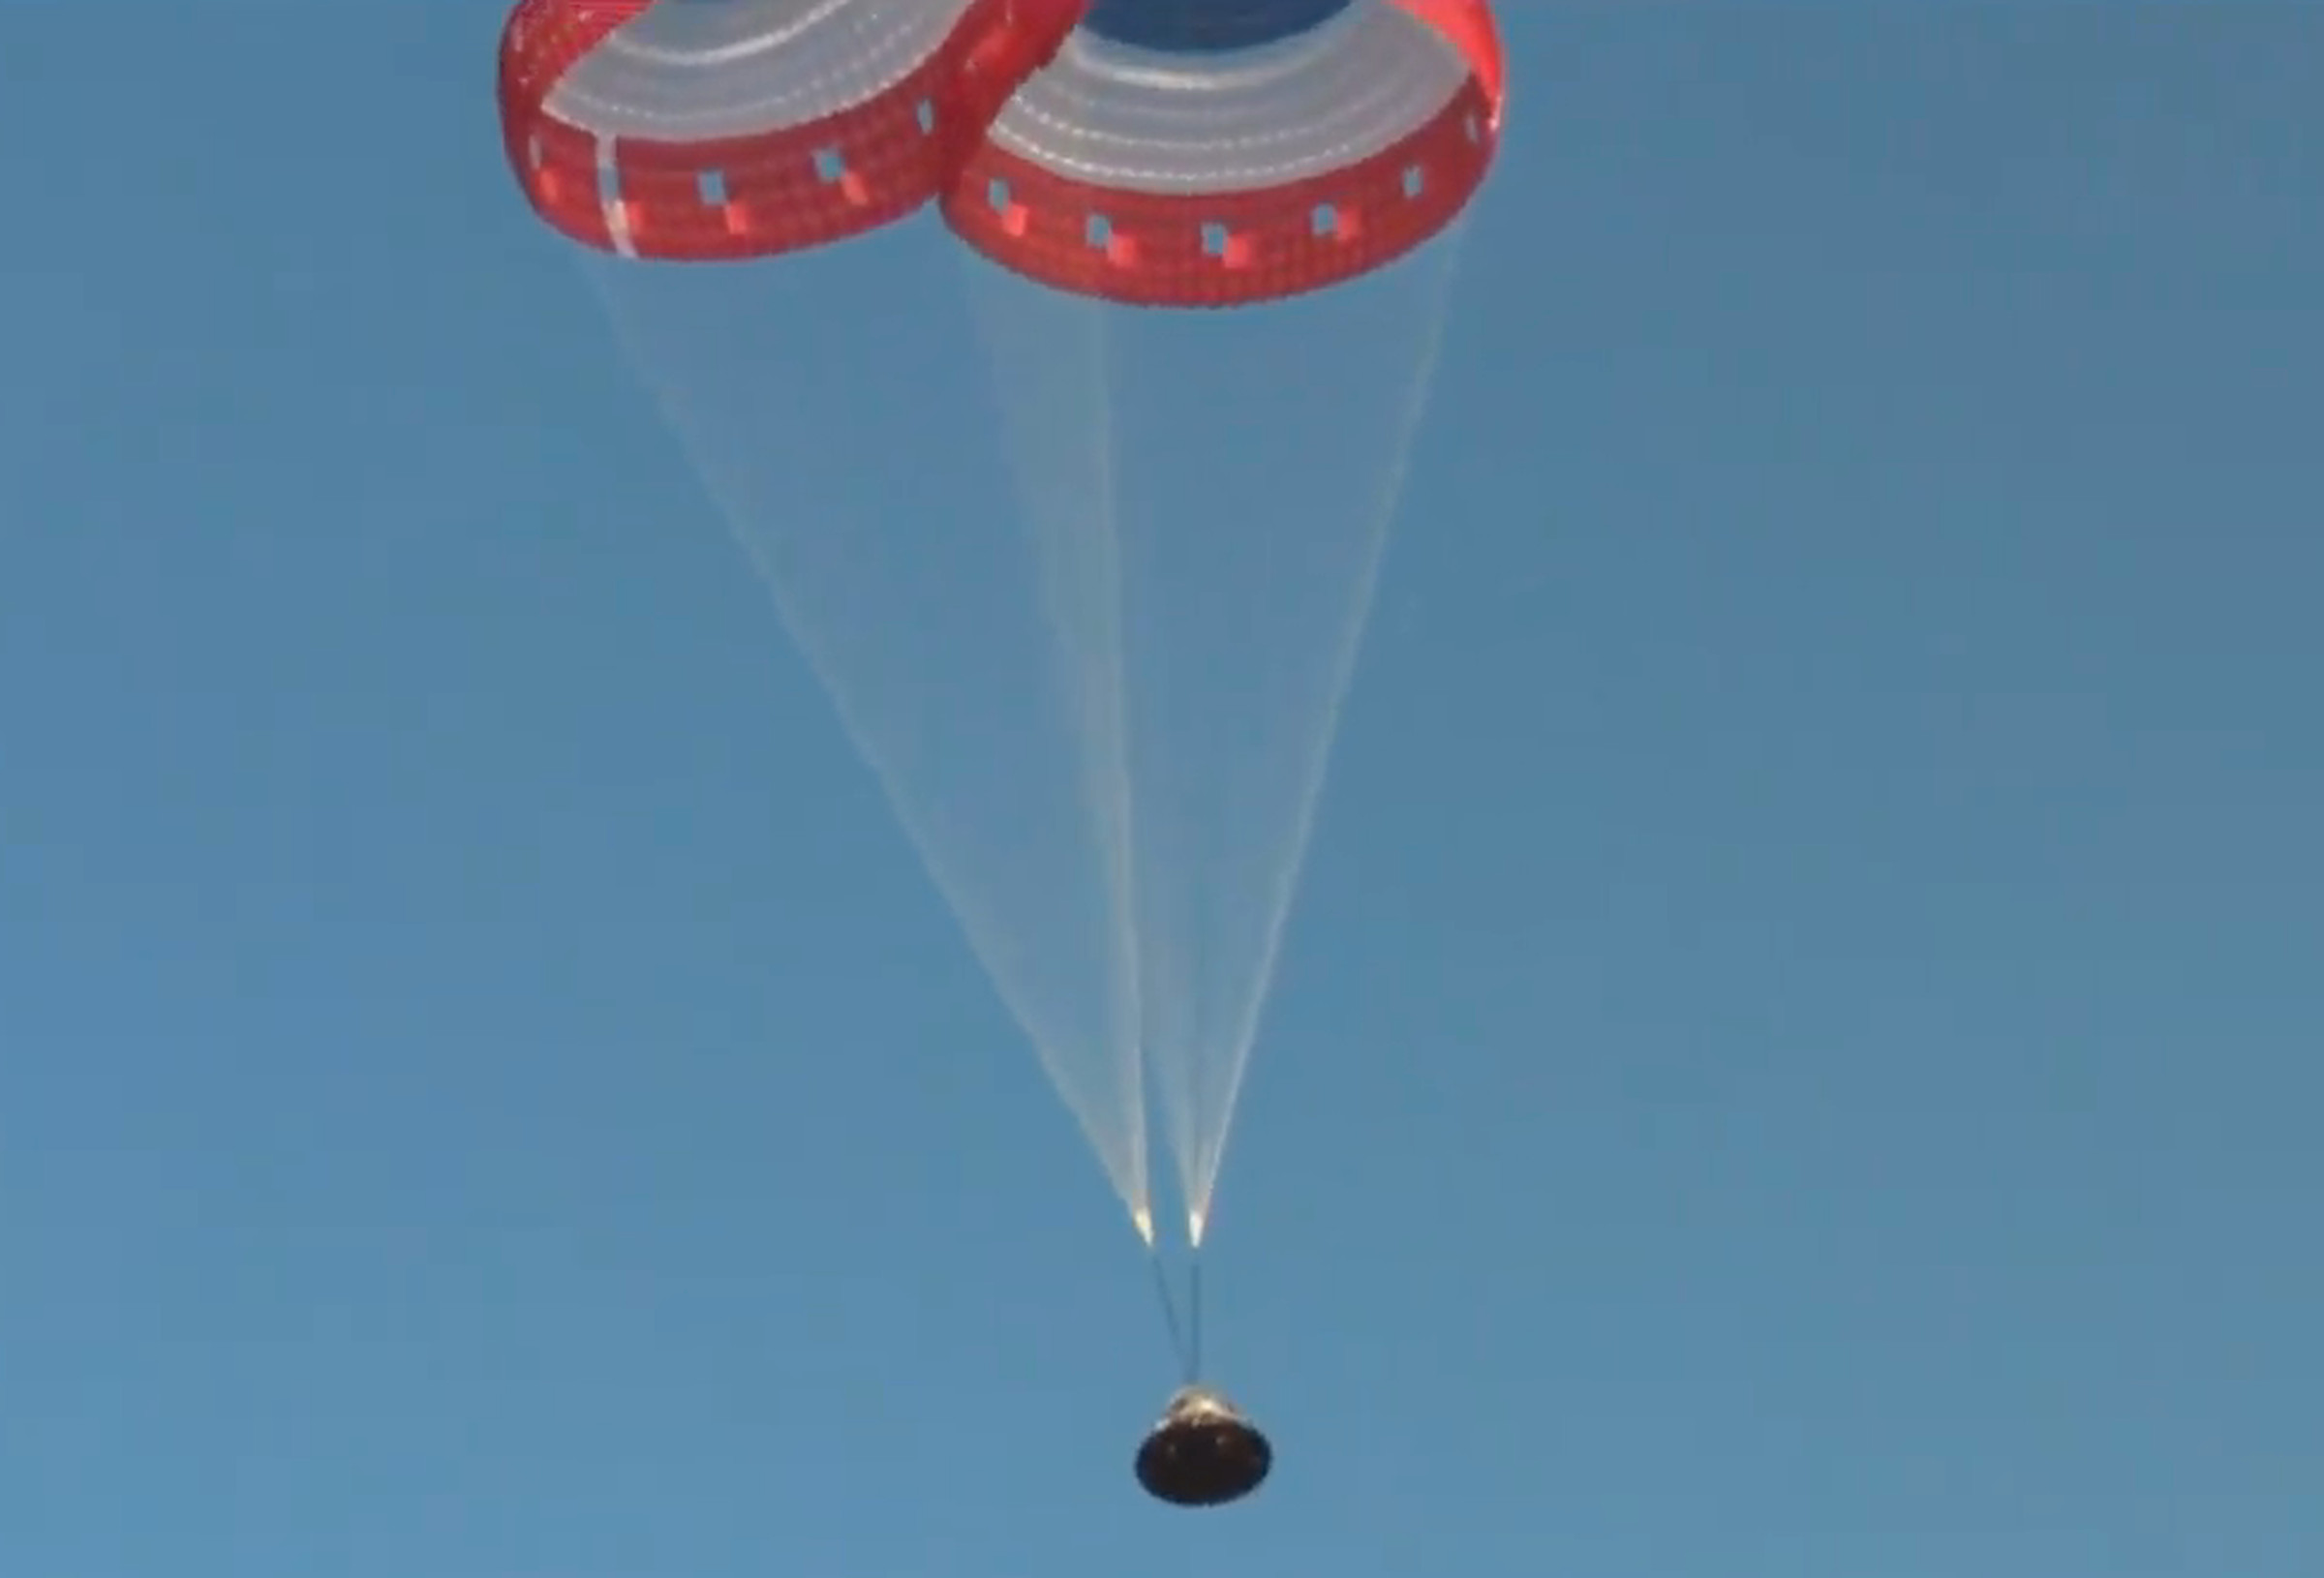 Parachuted deployed during the pad abort test.